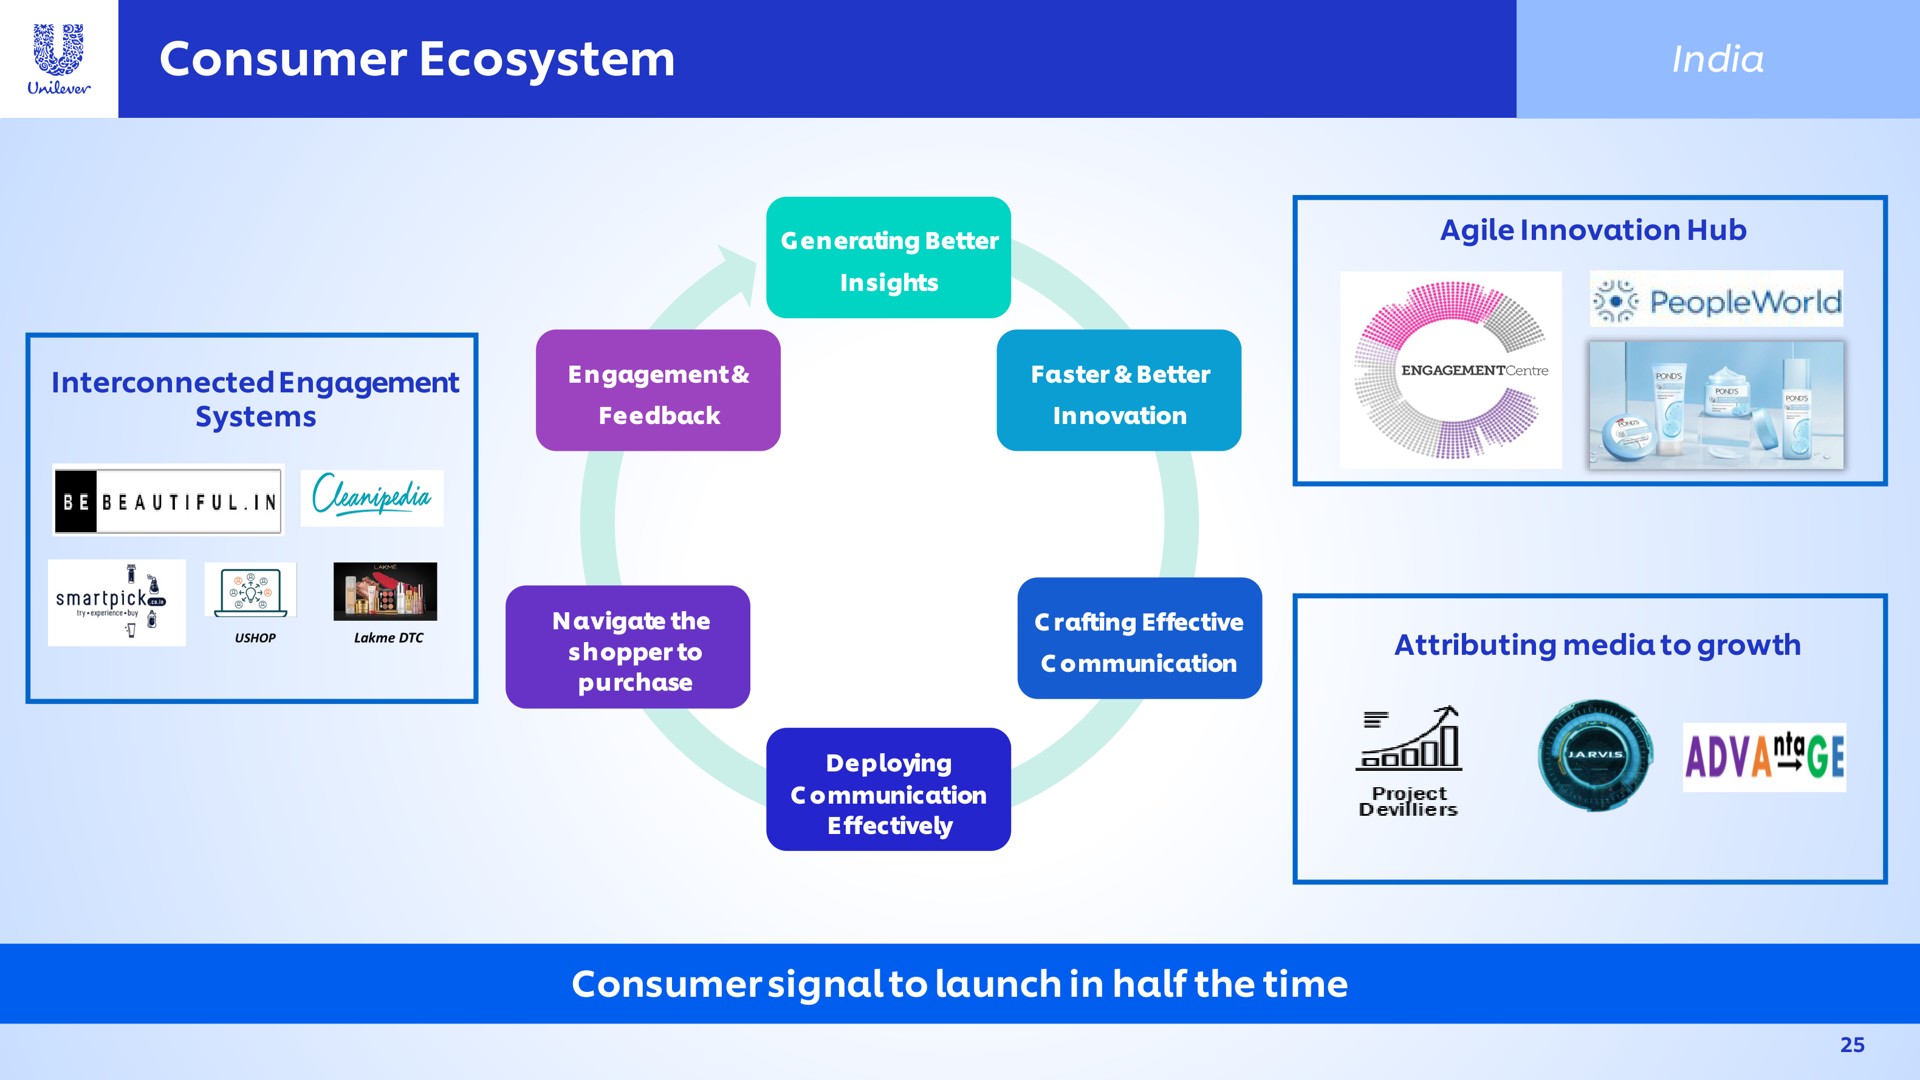 consumer ecosystem launch in half the time | Unilever